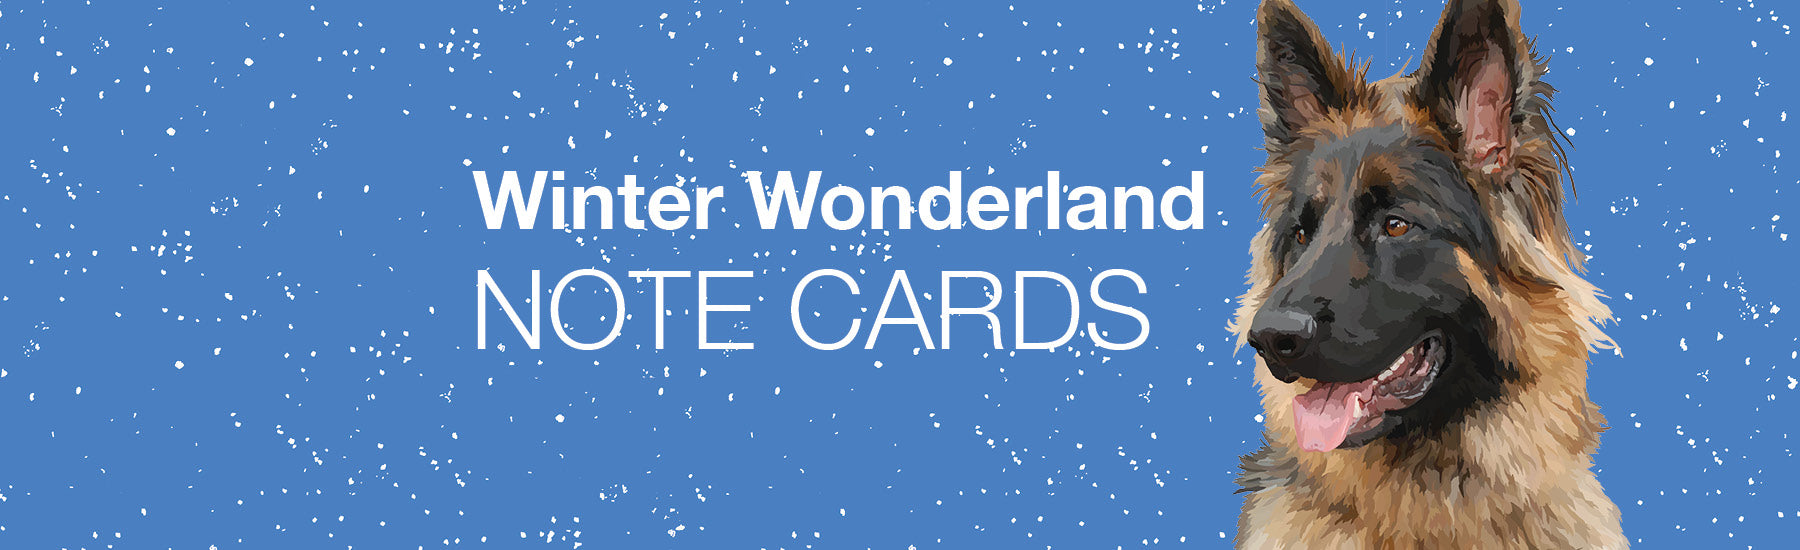 WINTER NOTE CARDS